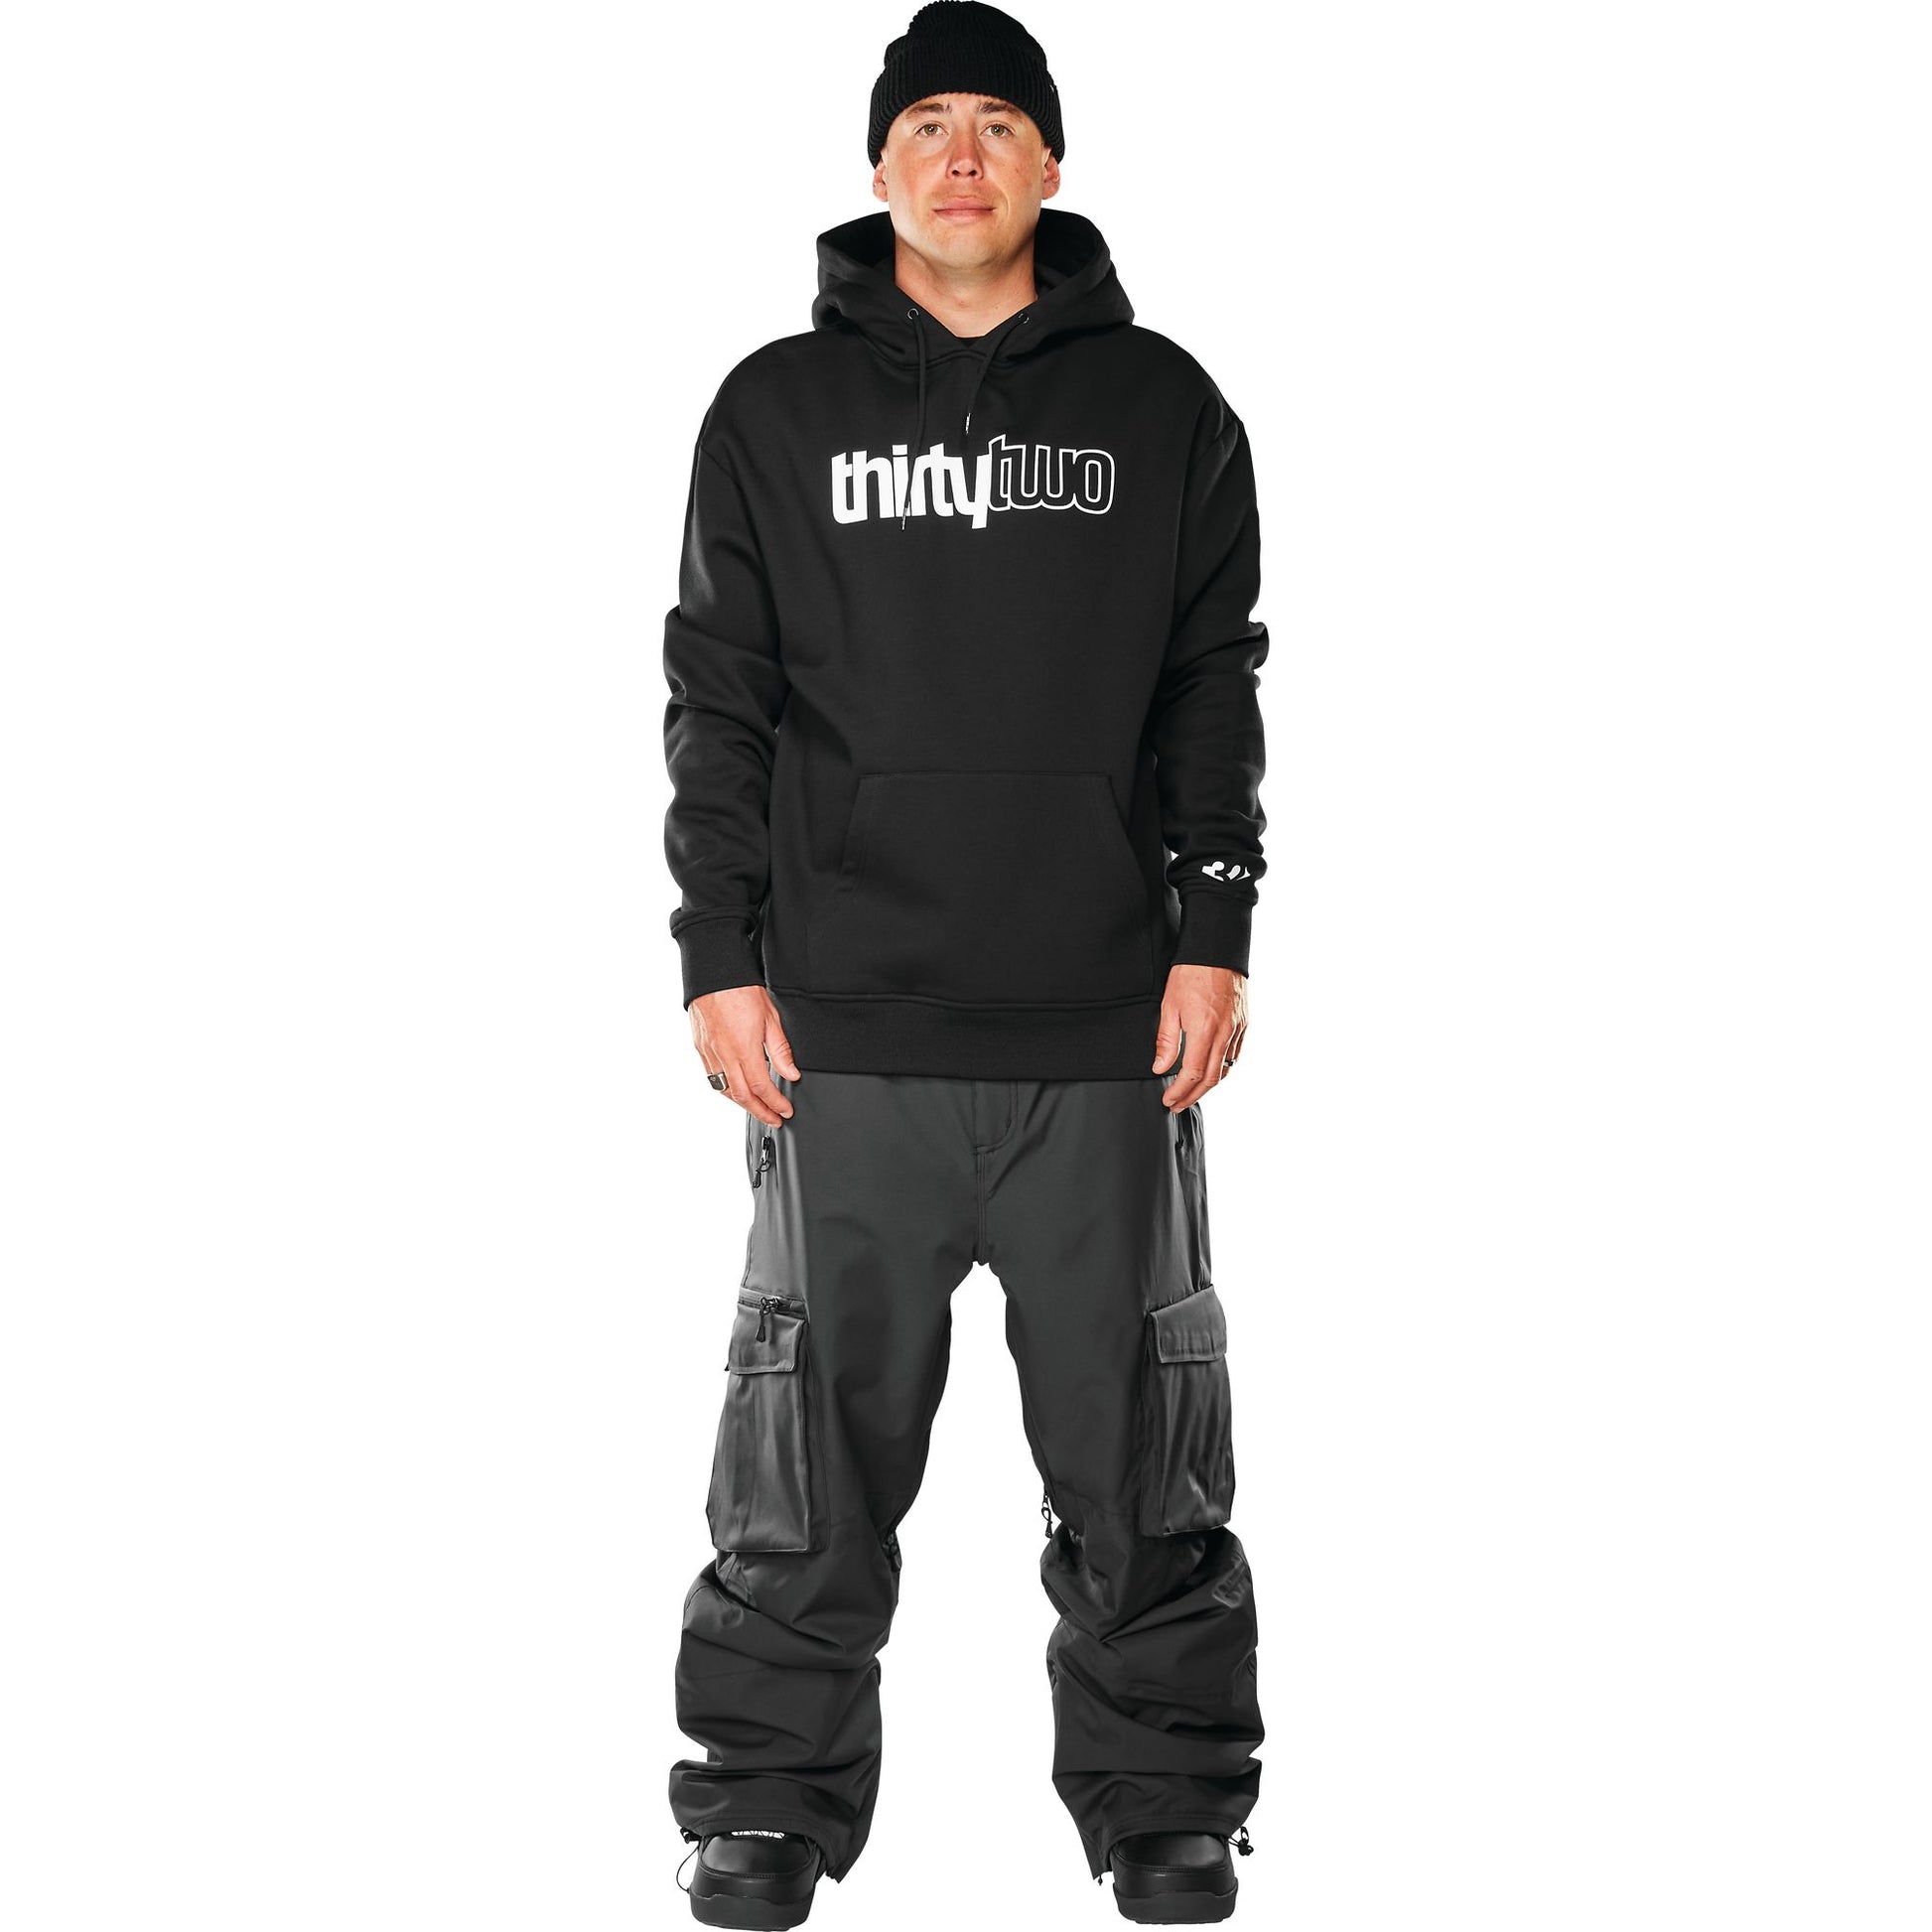 ThirtyTwo Double Tech Hooded Pullover Black S Sweatshirts & Hoodies